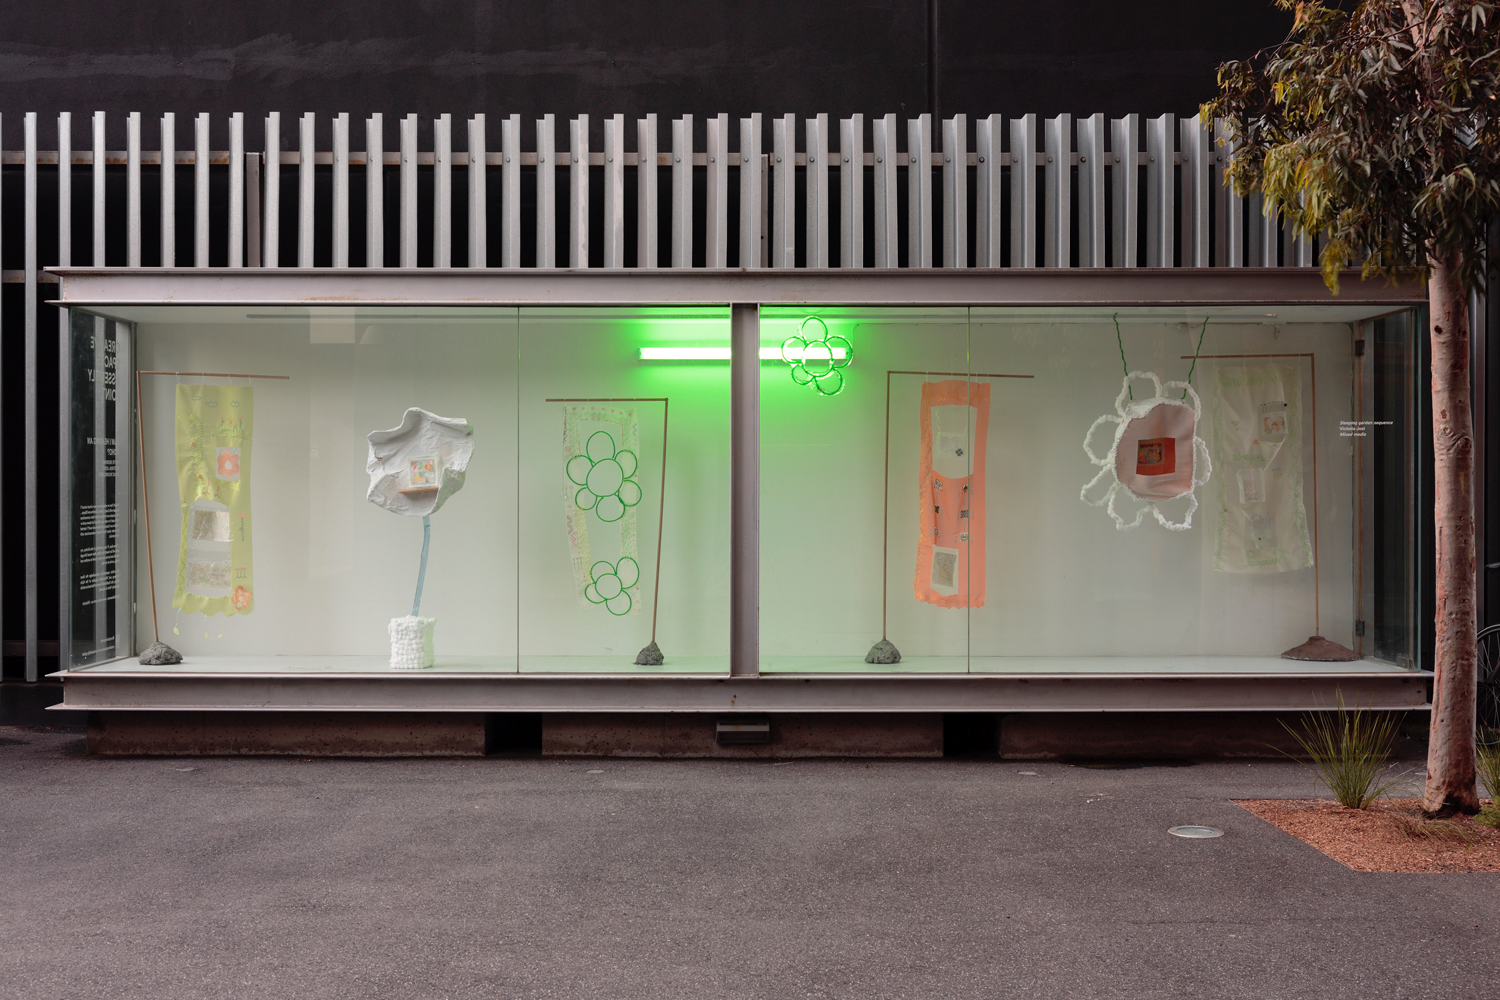 Sleeping Garden Sequence was exhibited at Assembly Point, in a seven-meter vitrine, from May to June 2020.